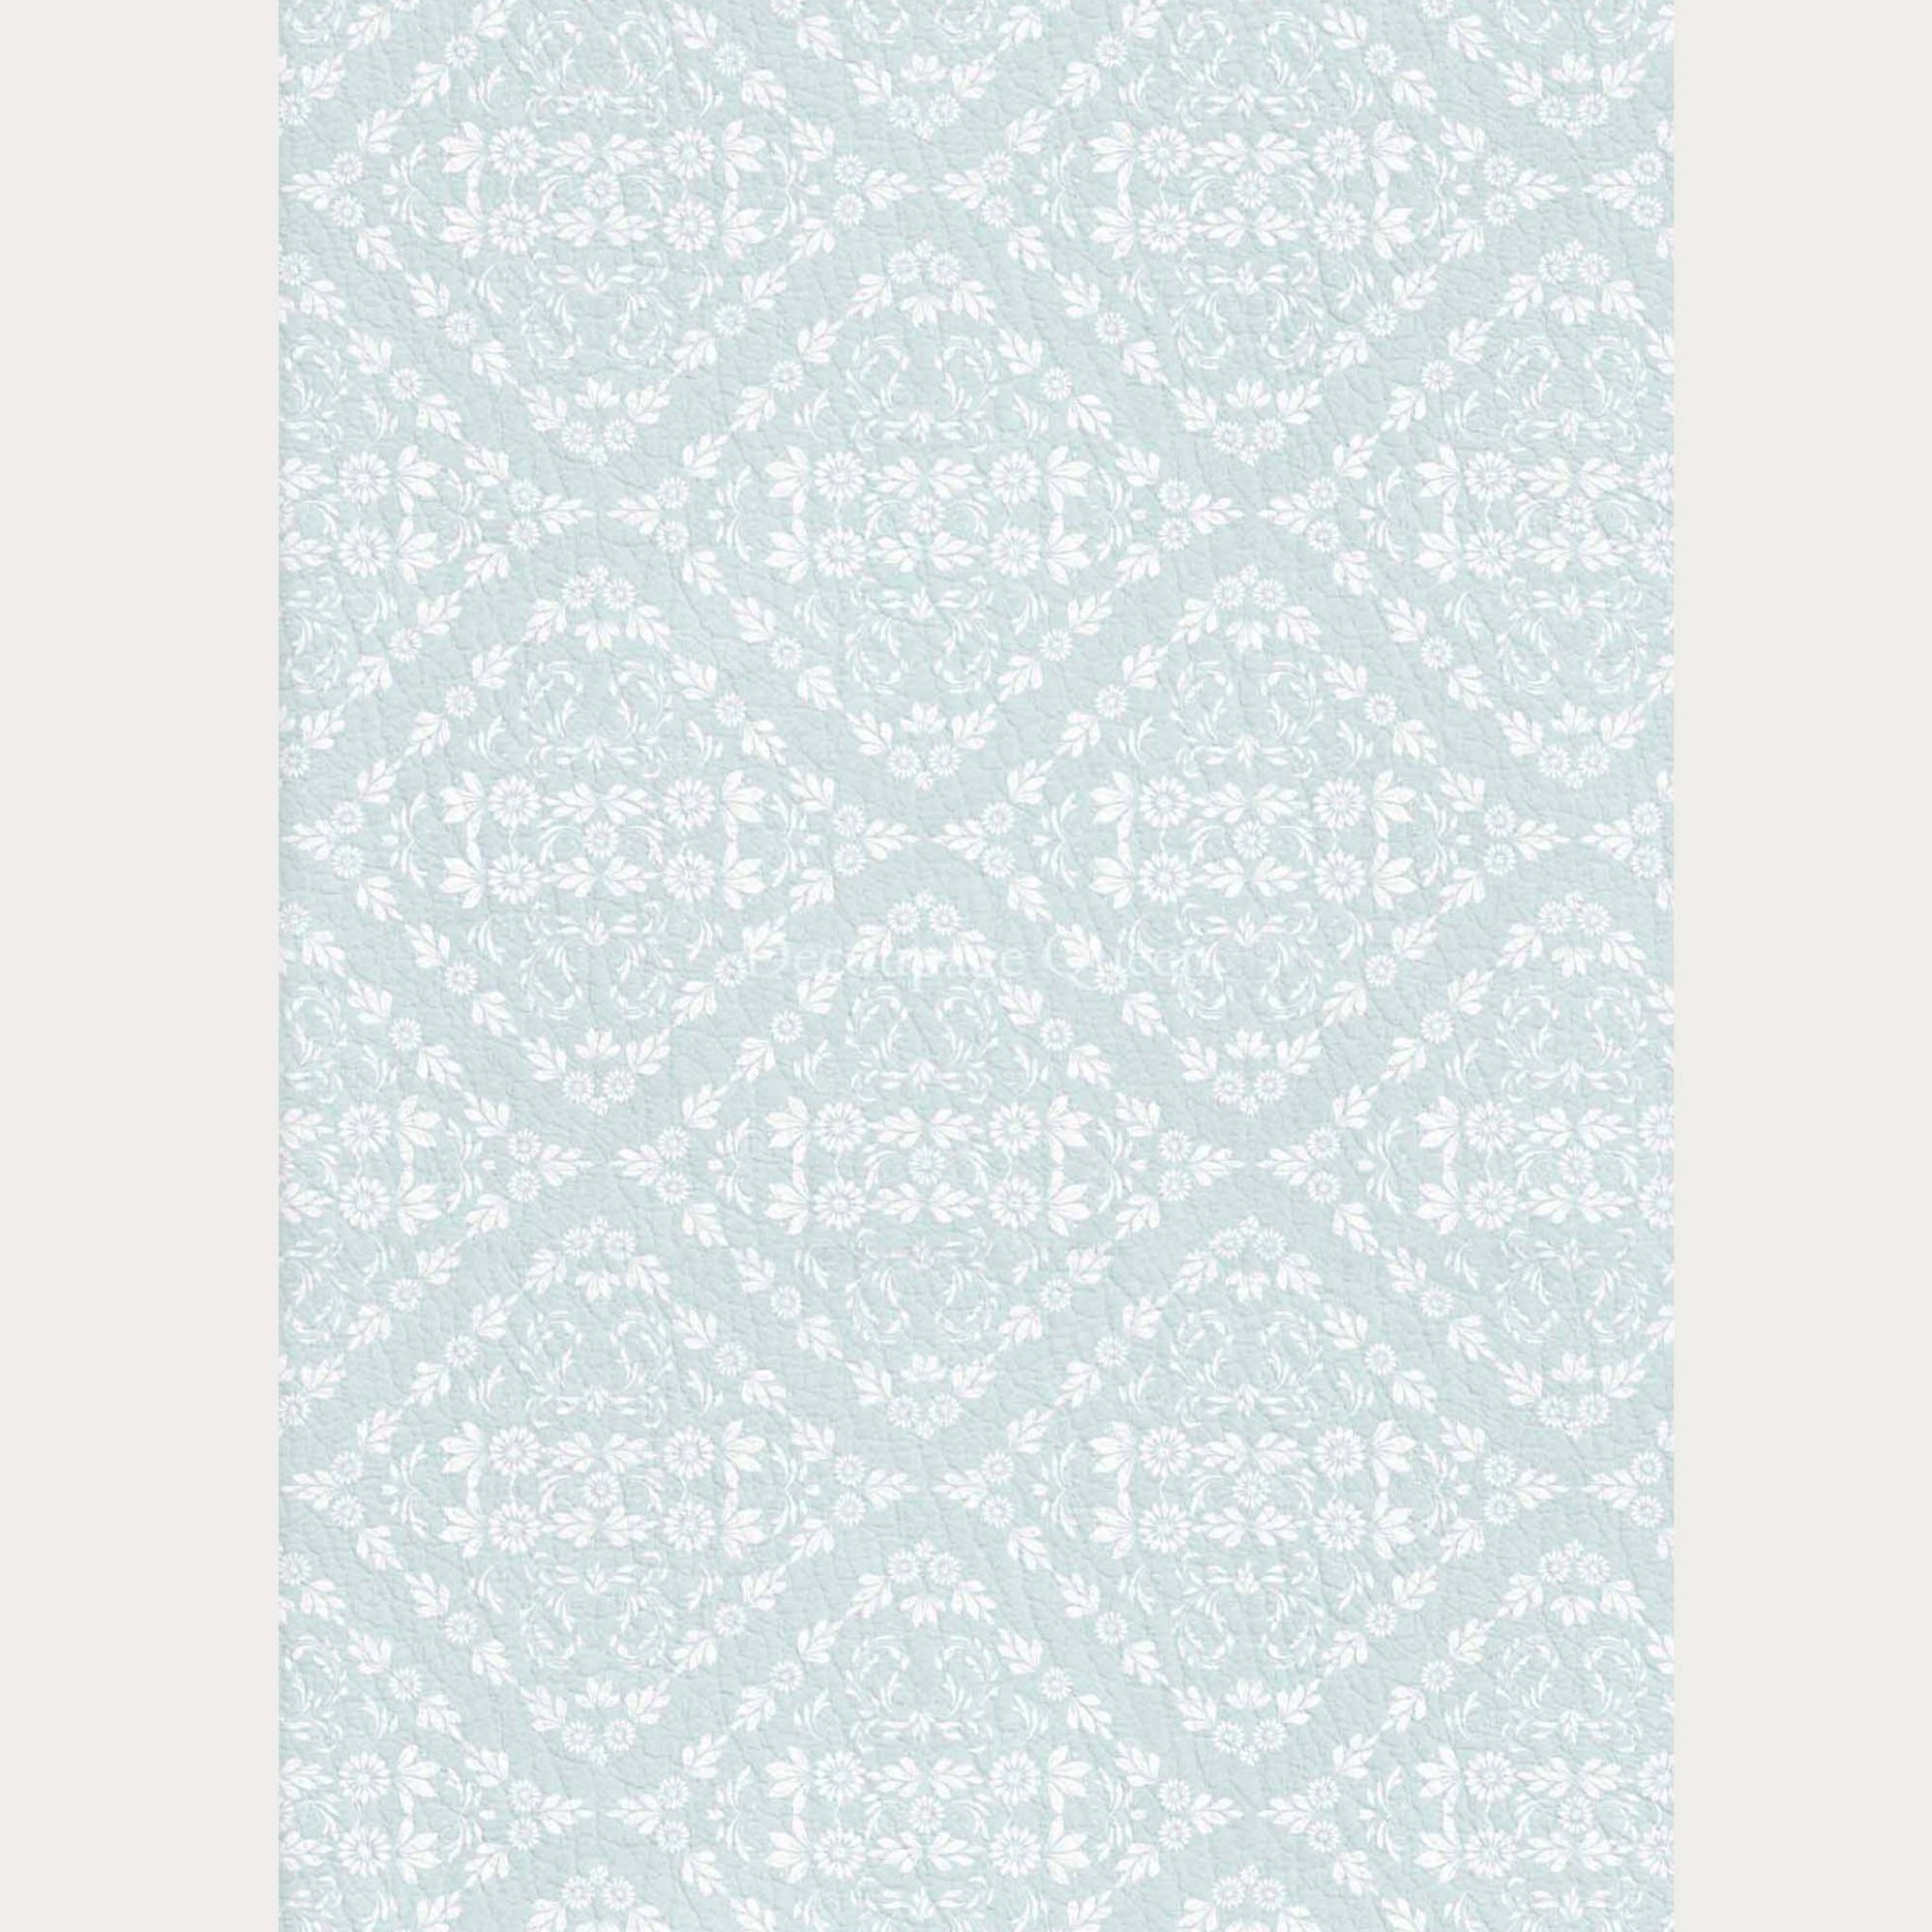 A3 rice paper that features quilted diamonds of dainty white flowers sit against a light blue background. Light beige borders are on the sides.